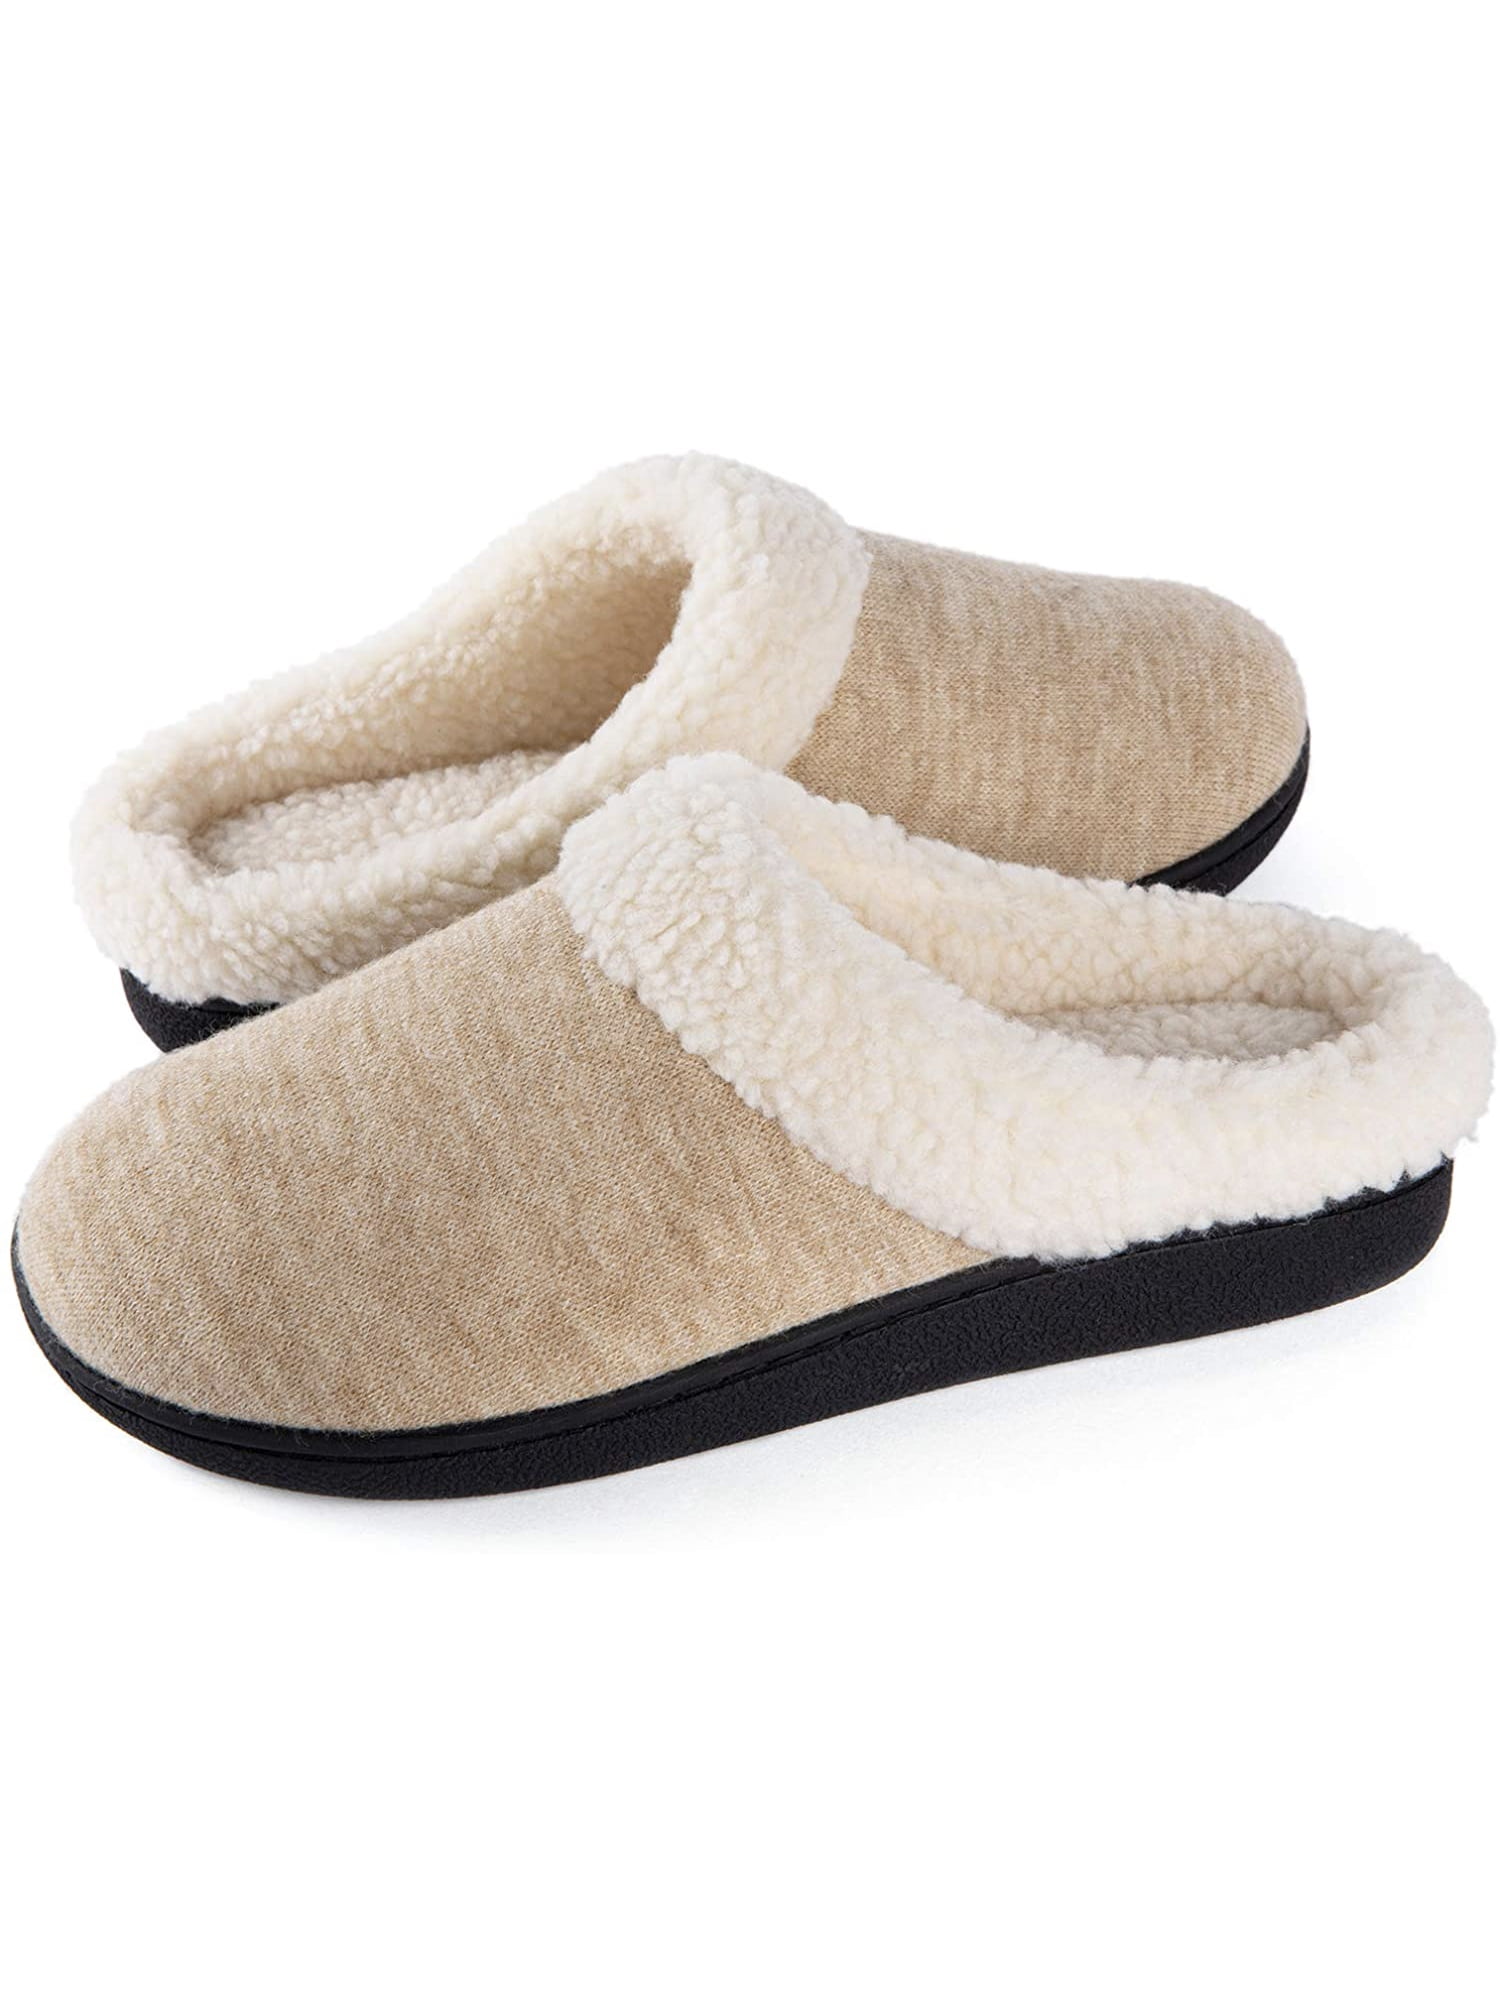 Felted slippers in US women/'s size 6